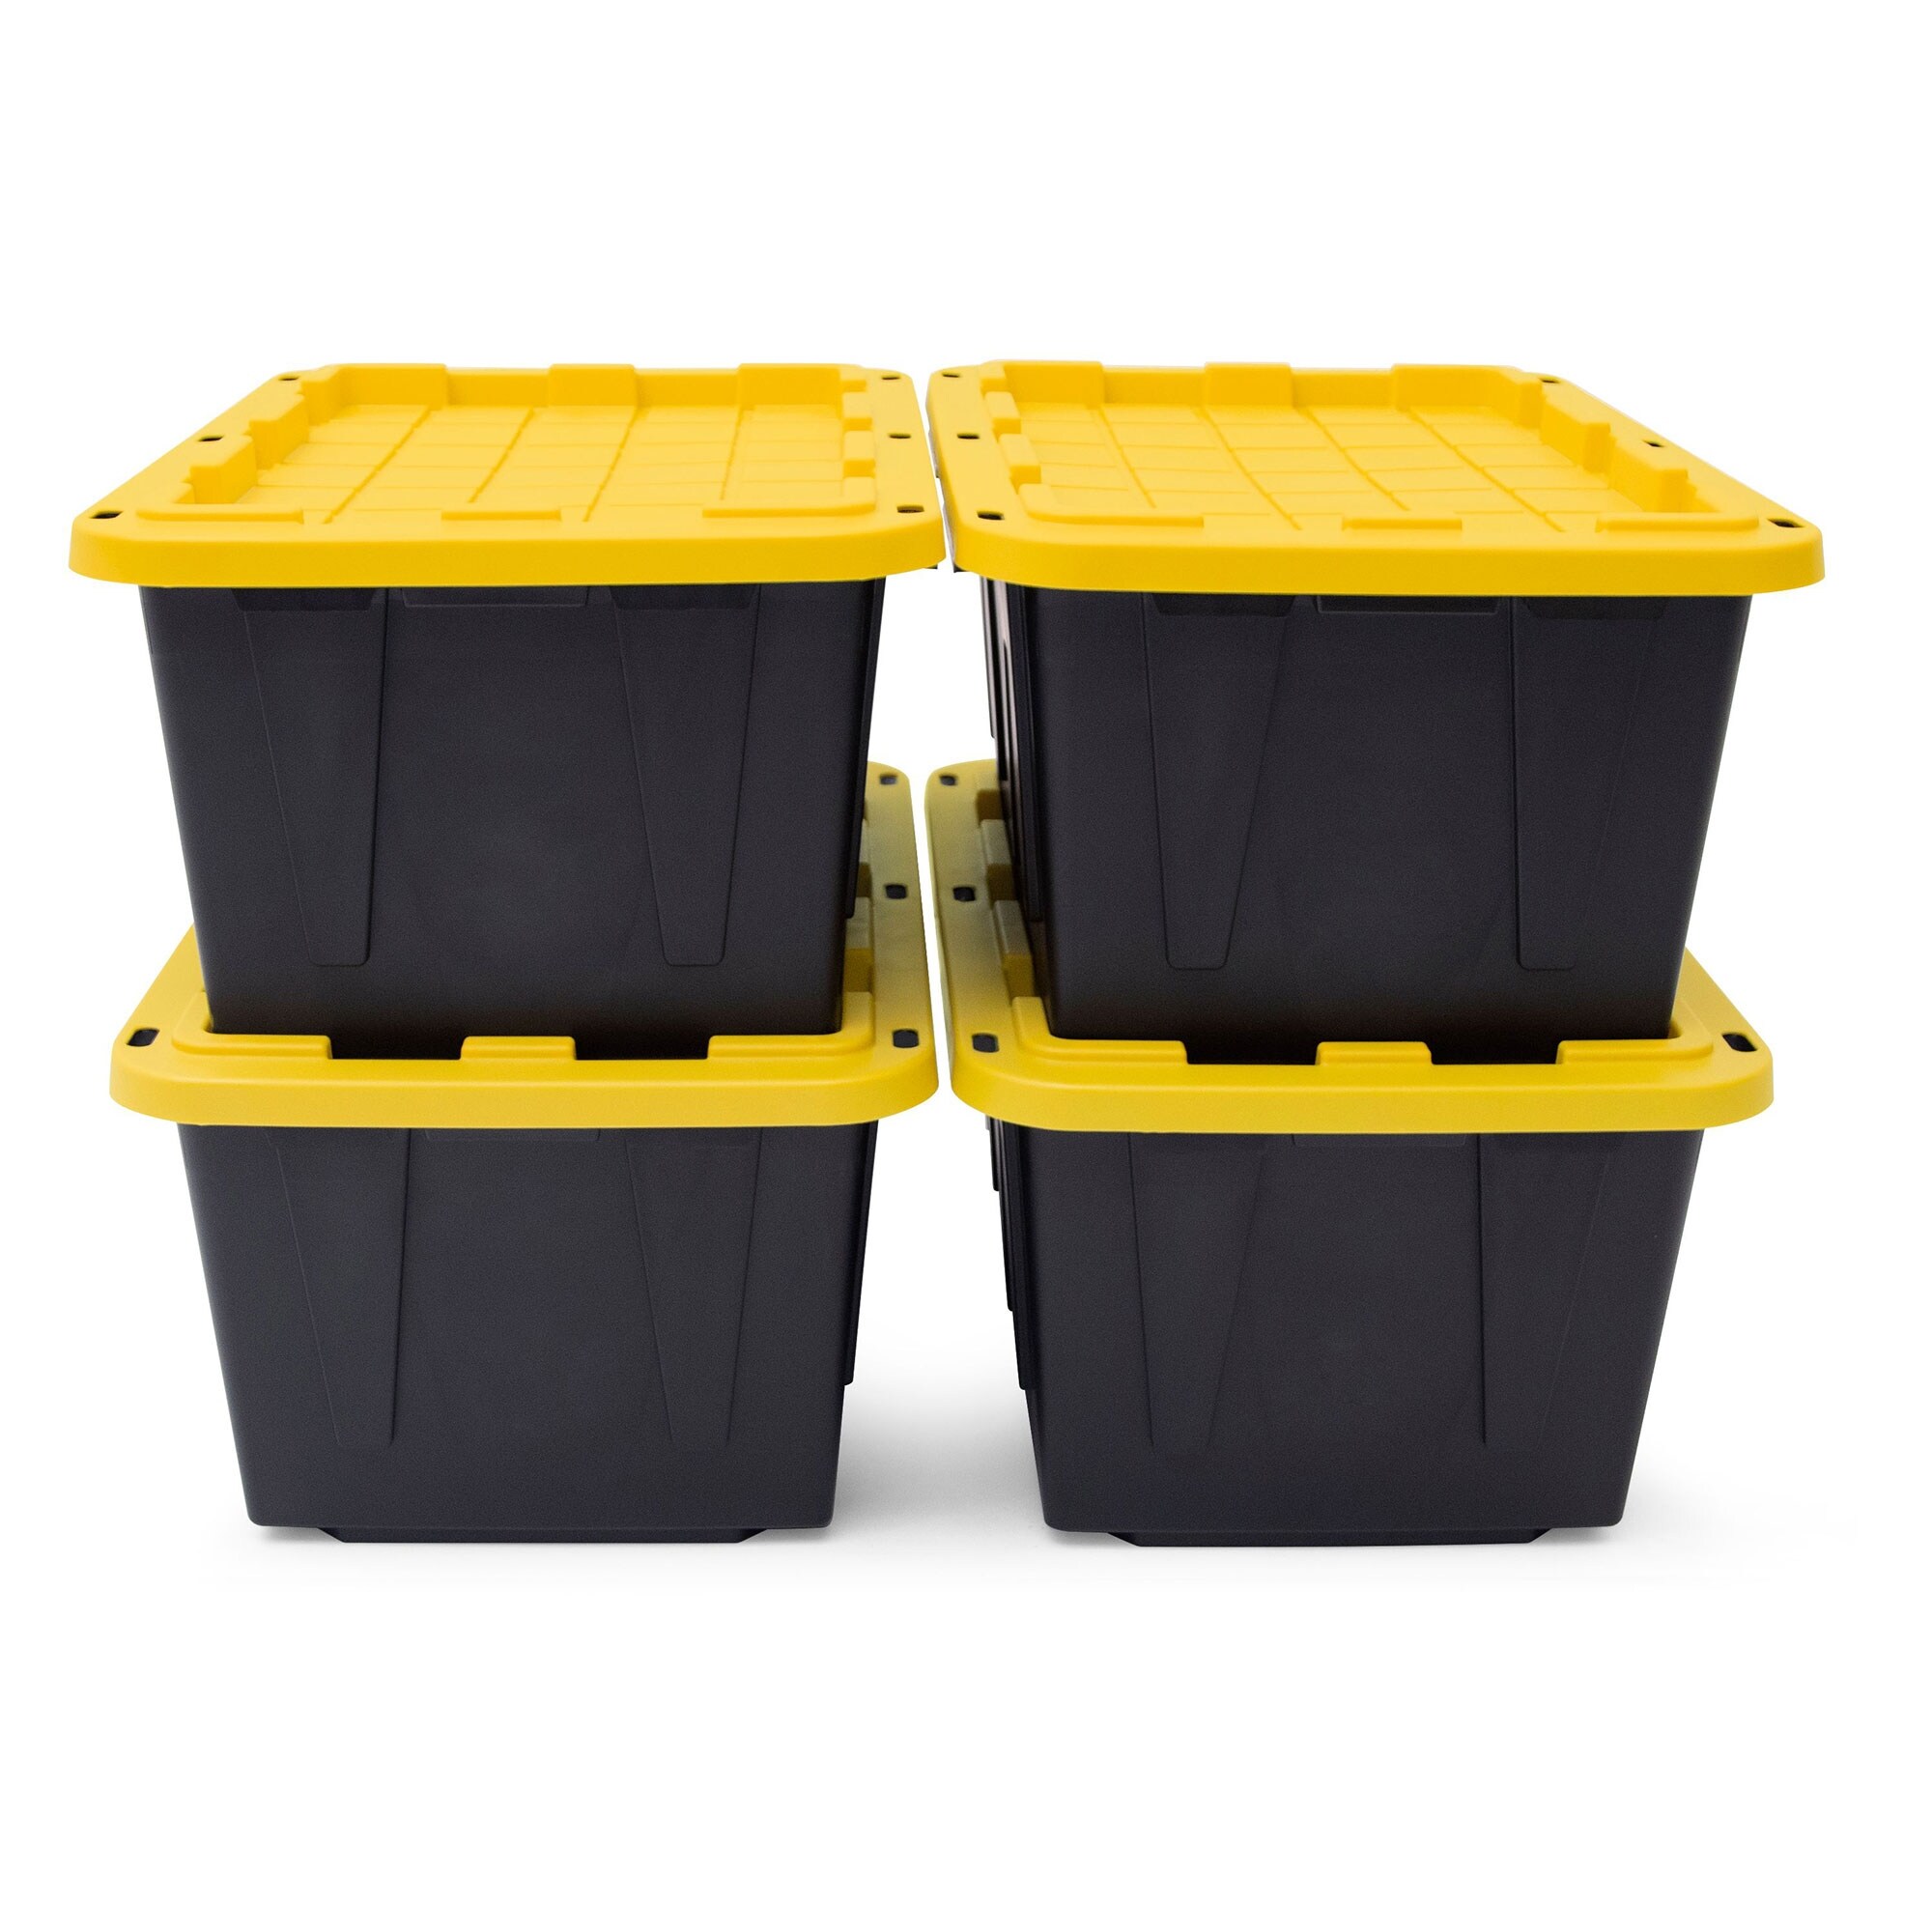 https://ak1.ostkcdn.com/images/products/is/images/direct/0c4d5f1b33e735099ded40f5aa03581ba61ca37d/TOUGH-BOX-27-Gallon-Stackable-Storage-Totes-with-Lids%2C-Black-and-Yellow-%284-pack%29.jpg